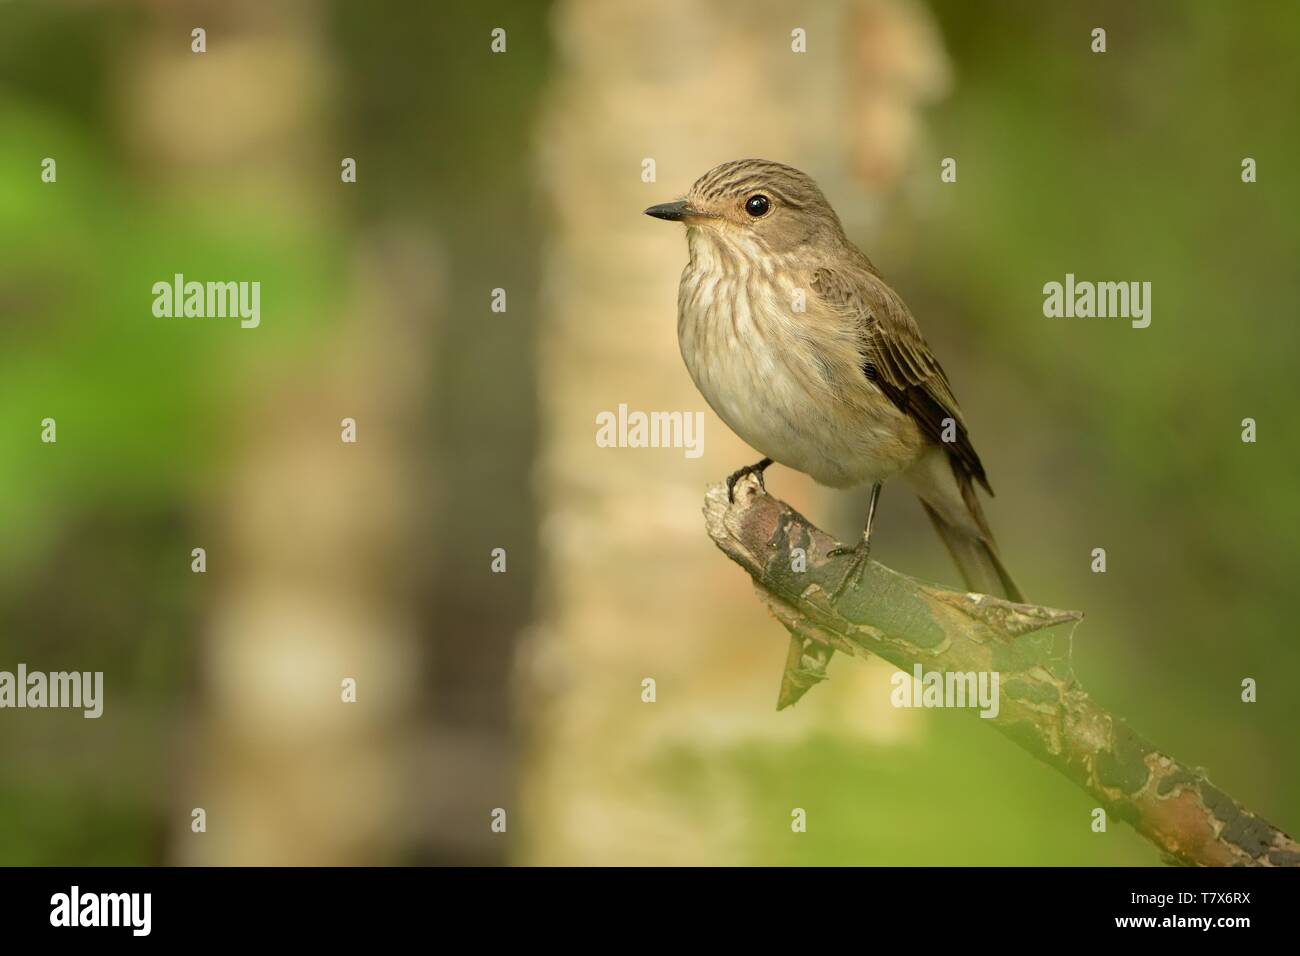 Spotted Flycatcher - Muscicapa striata sitting on the branch in the forest. Small passerine bird in the Old World flycatcher family, breeds in Europe  Stock Photo